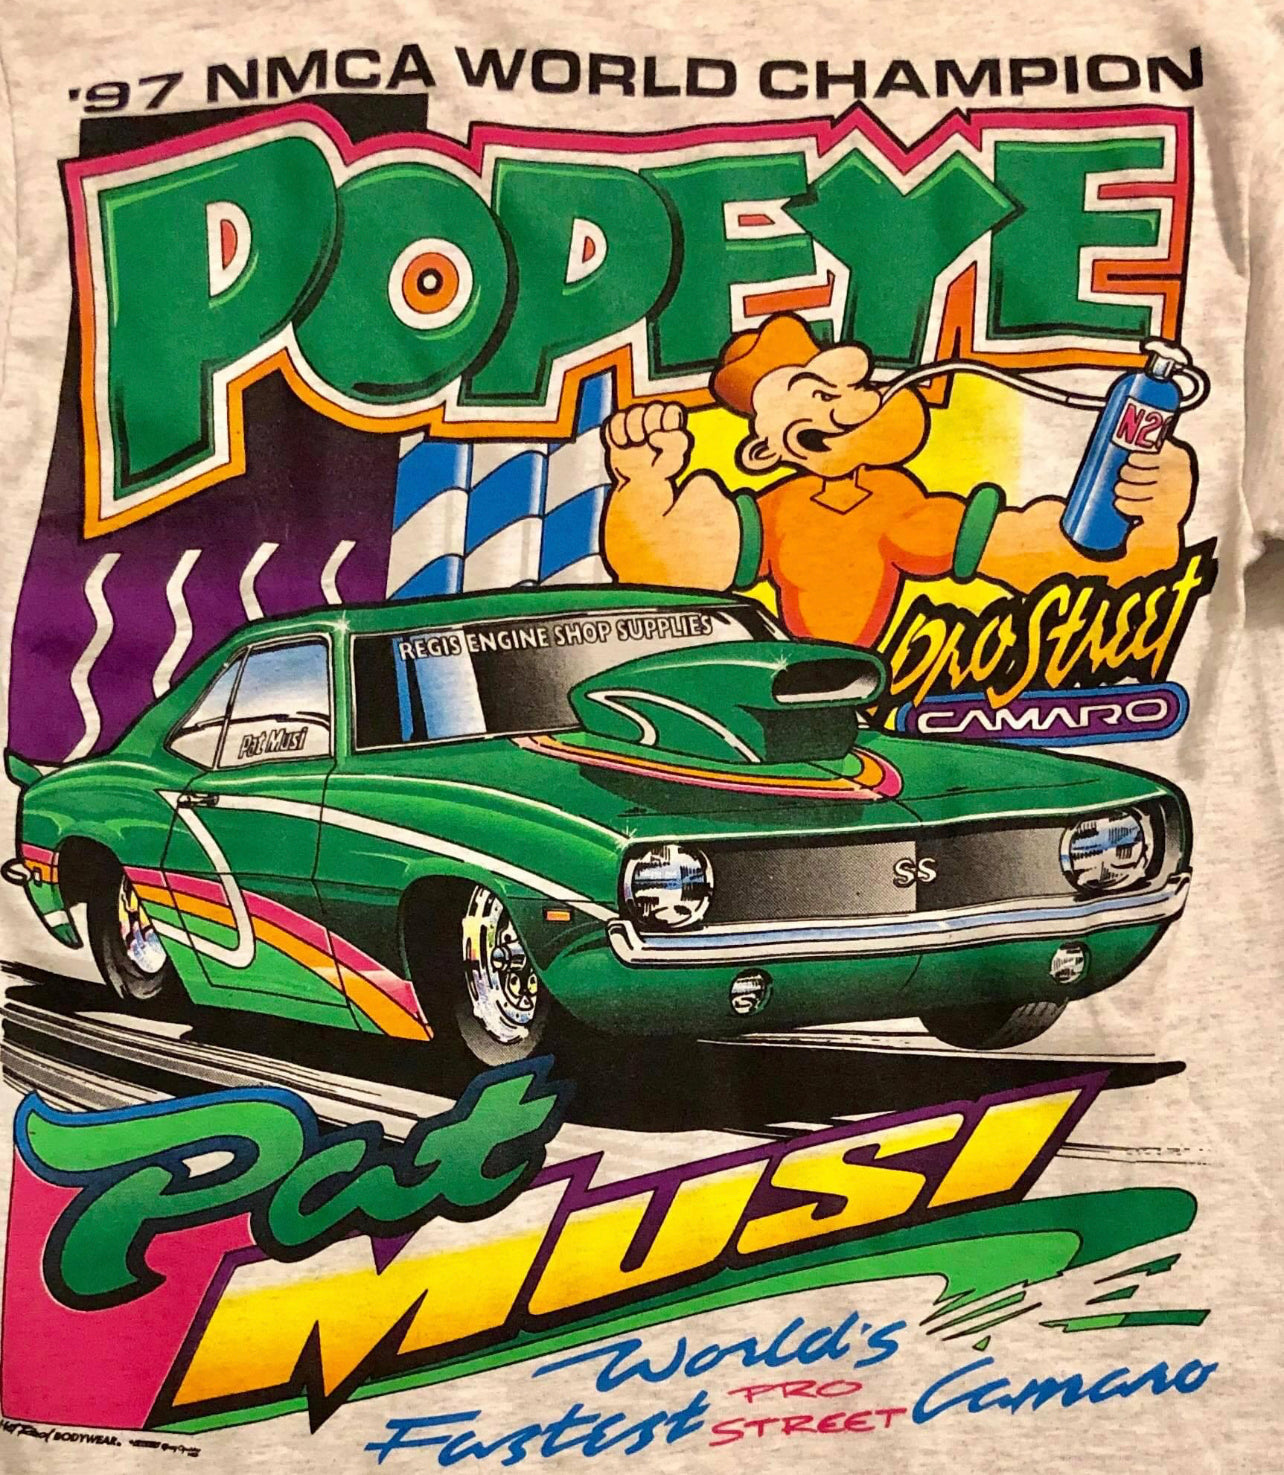 Limited Edition Vintage Popeye T-Shirt